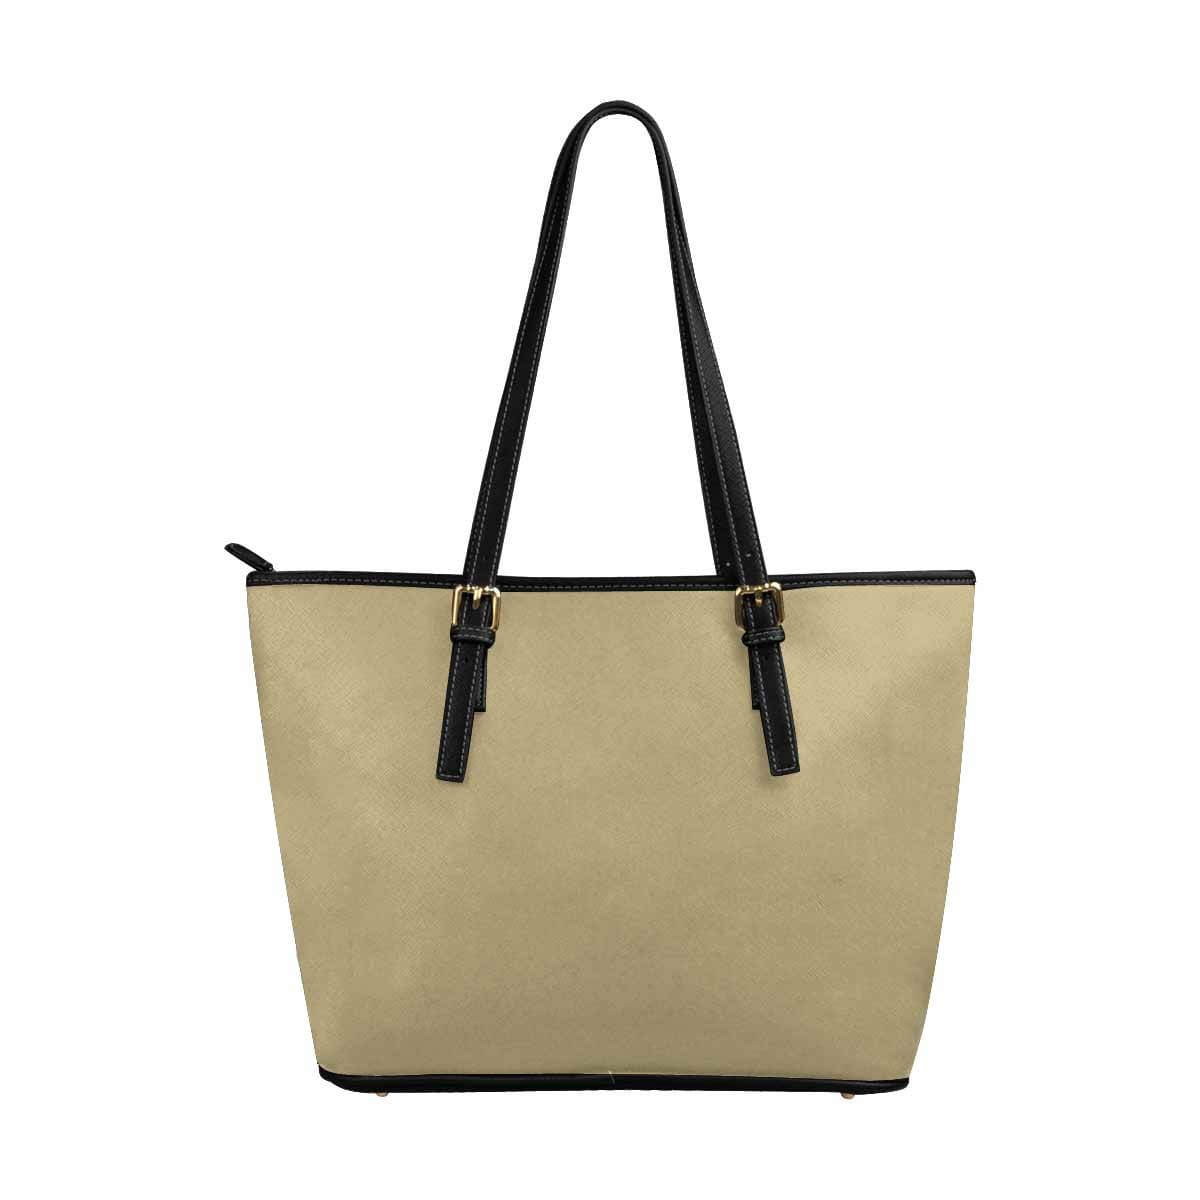 Large Leather Tote Shoulder Bag - Sand Dollar Brown - Bags | Leather Tote Bags